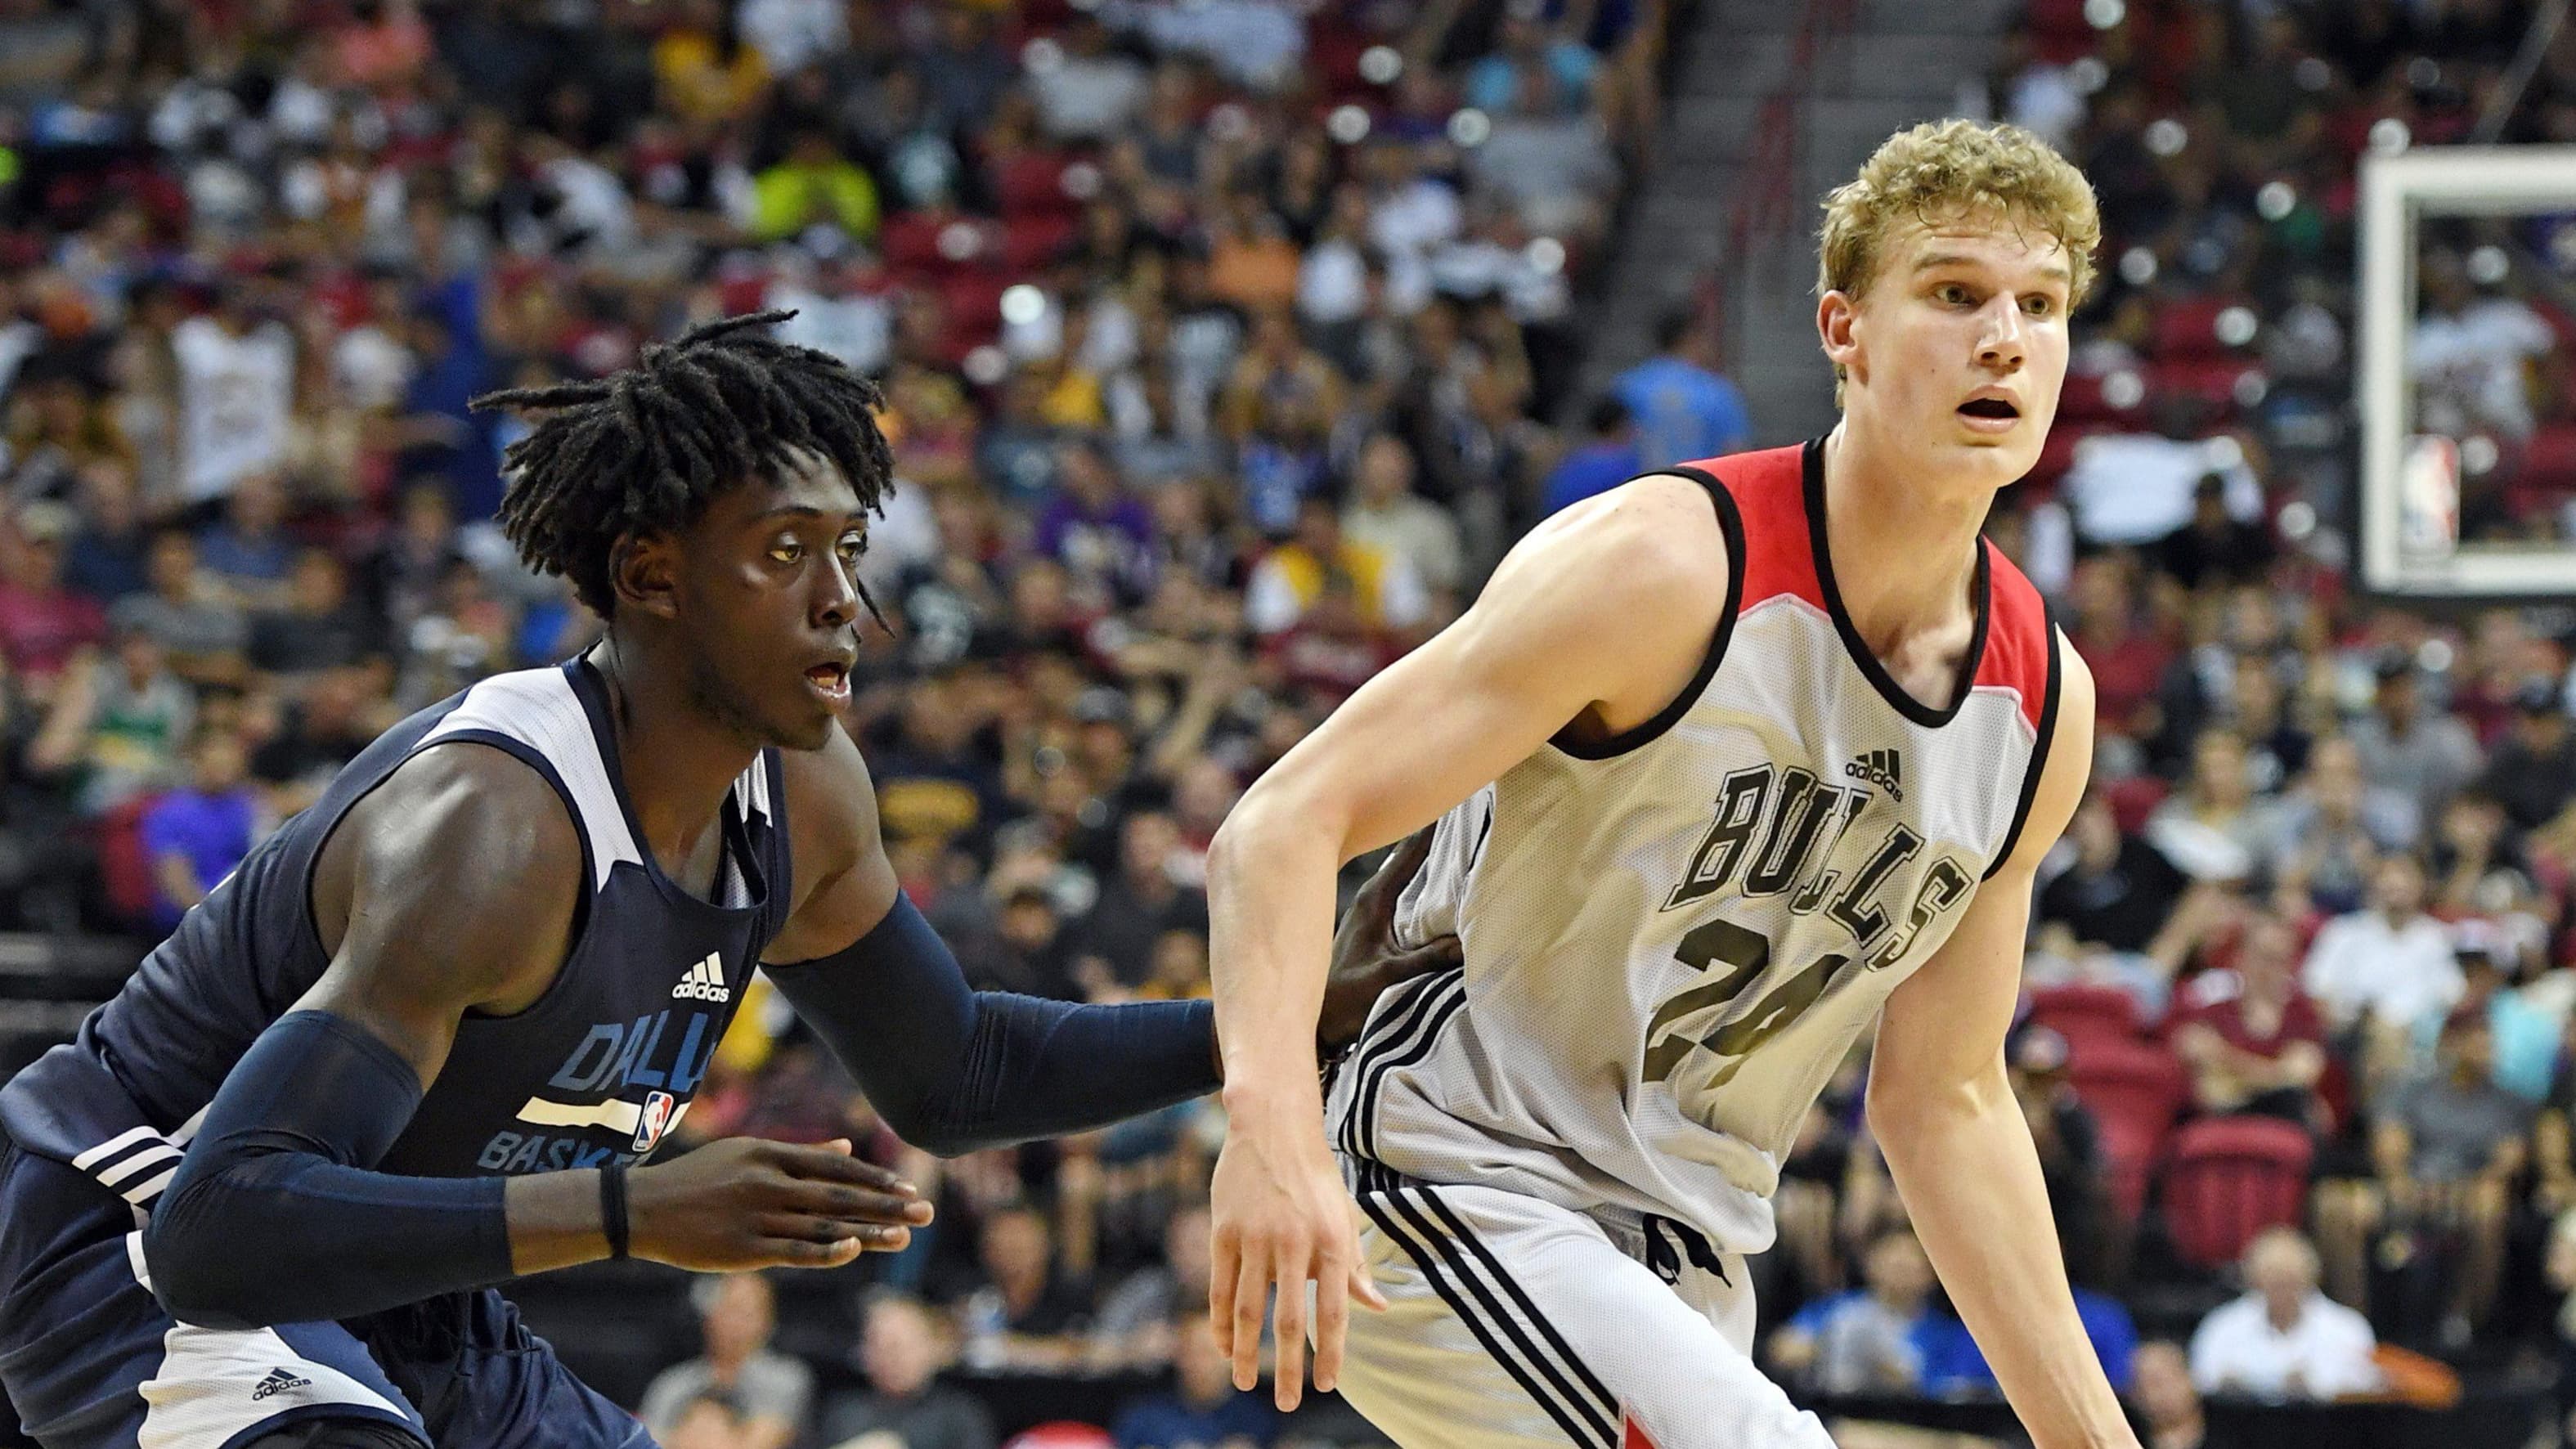 Lauri Markkanen is on fire. How much of this is sustainable? - SLC Dunk